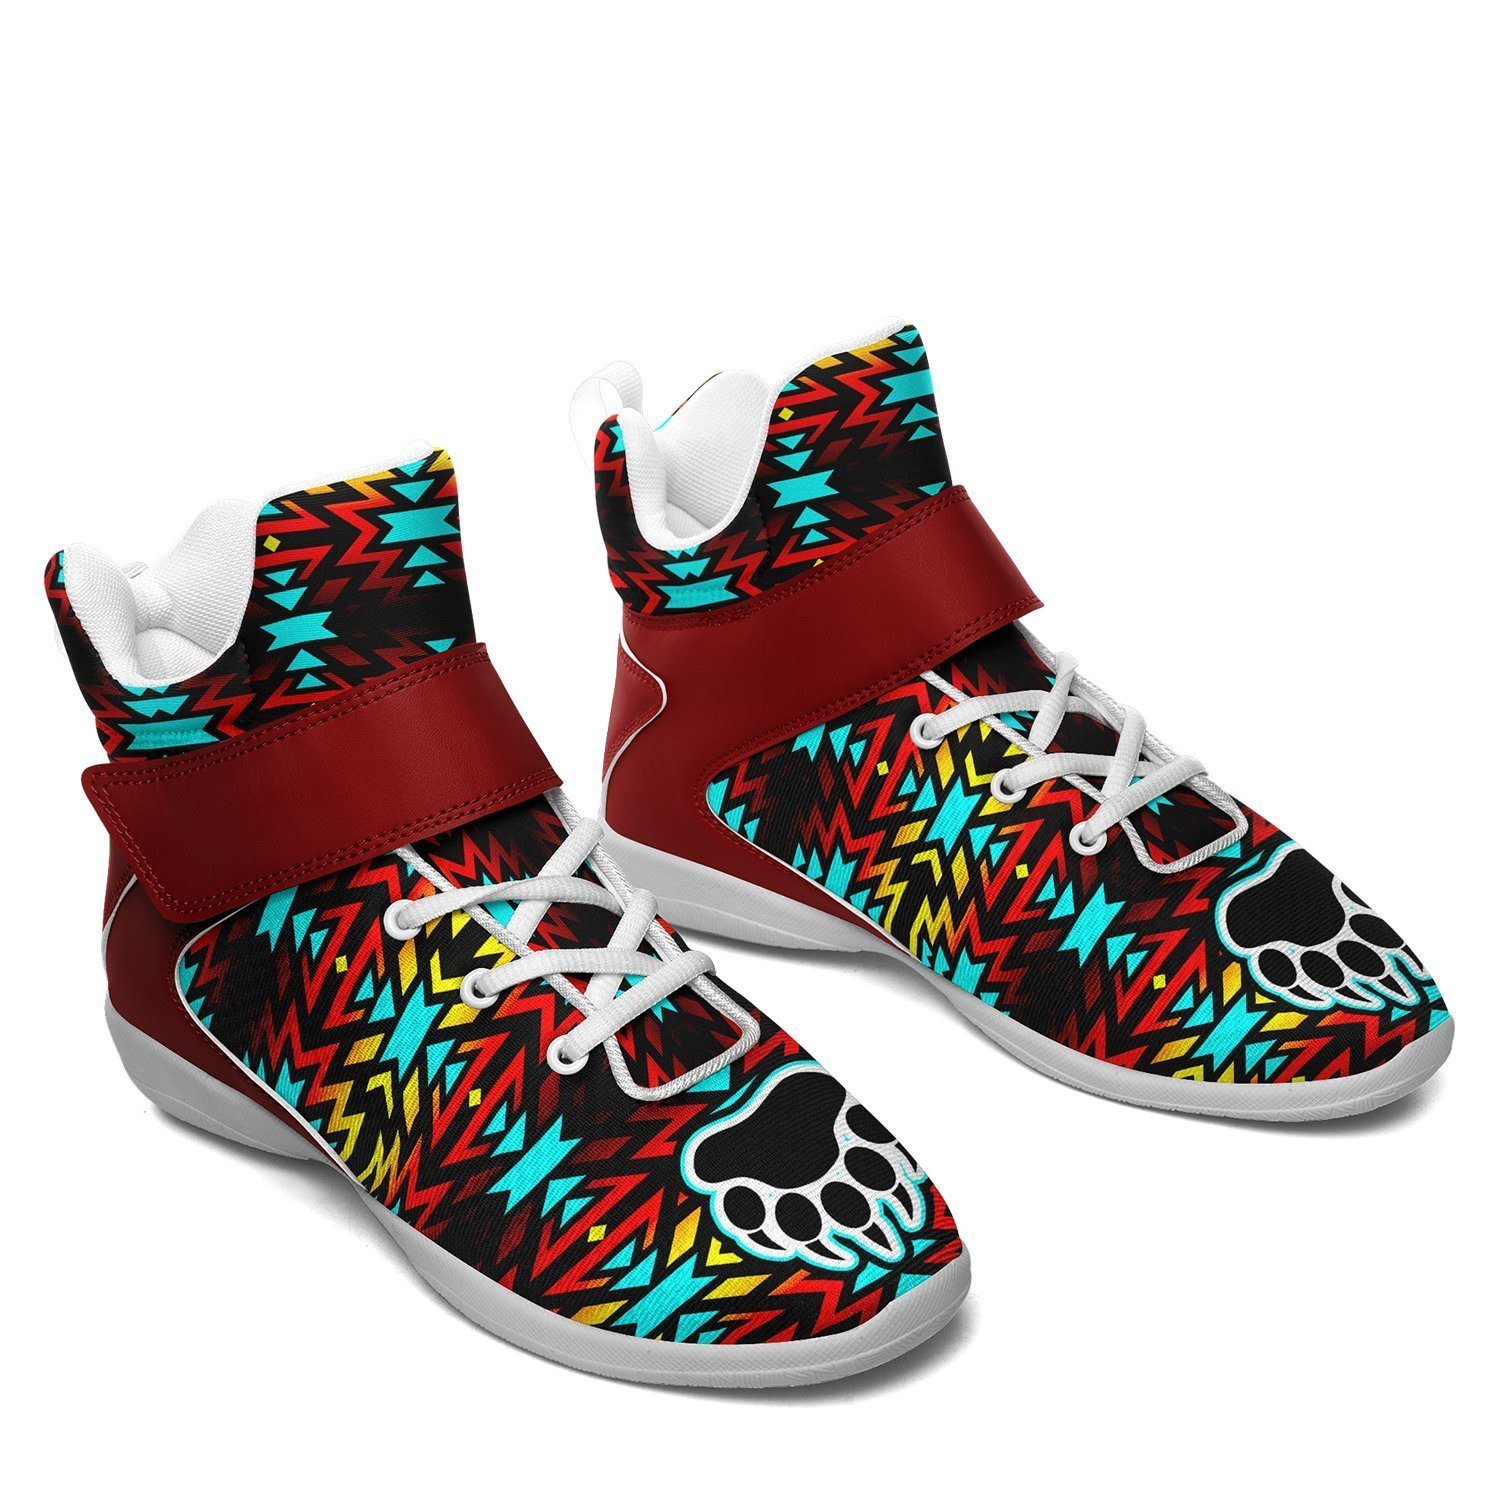 Fire Colors and Turquoise Bearpaw Ipottaa Basketball / Sport High Top Shoes - White Sole 49 Dzine 